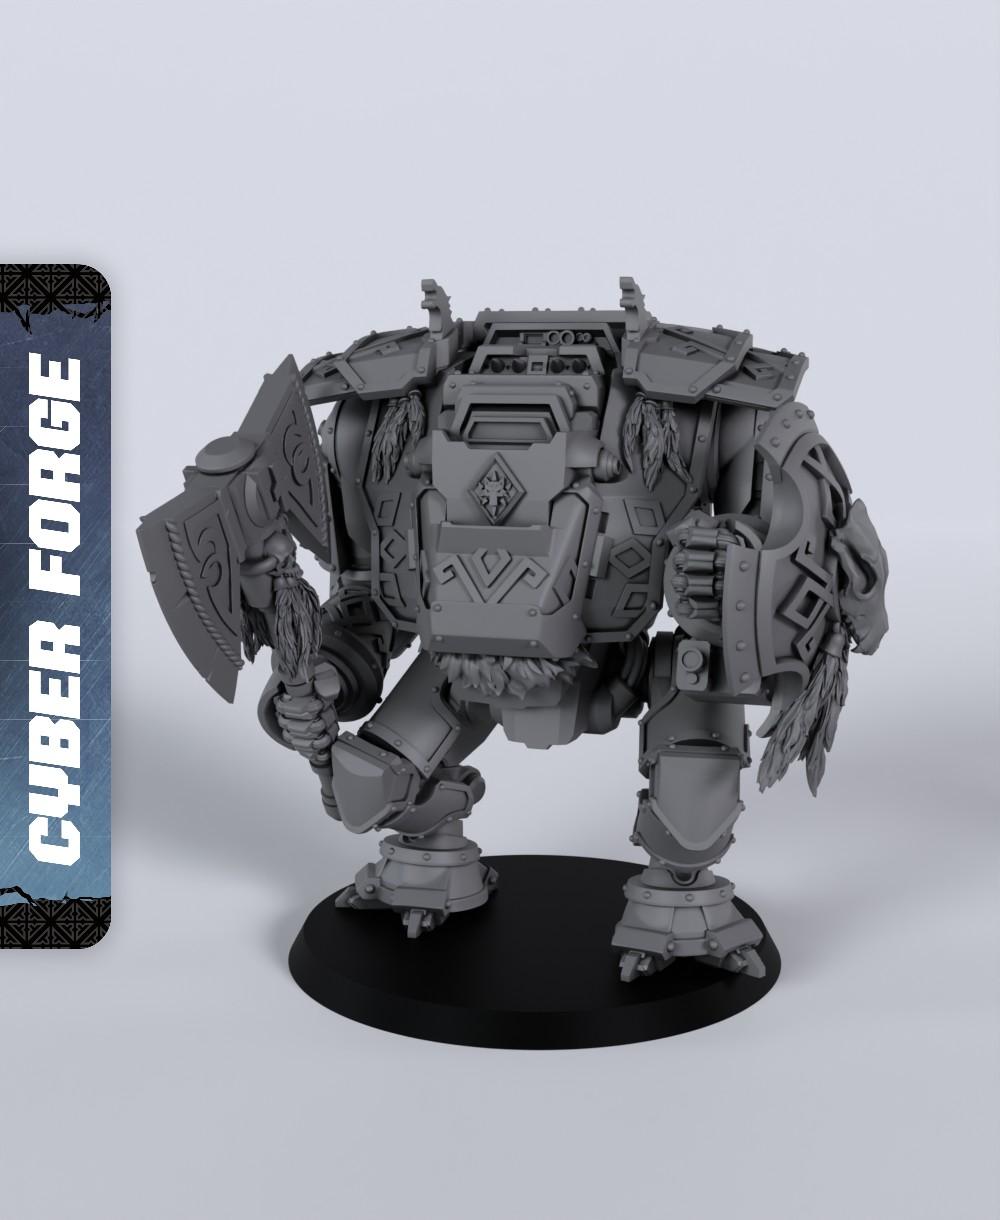 RDT Ironfur - With Free Cyberpunk Warhammer - 40k Sci-Fi Gift Ideas for RPG and Wargamers 3d model